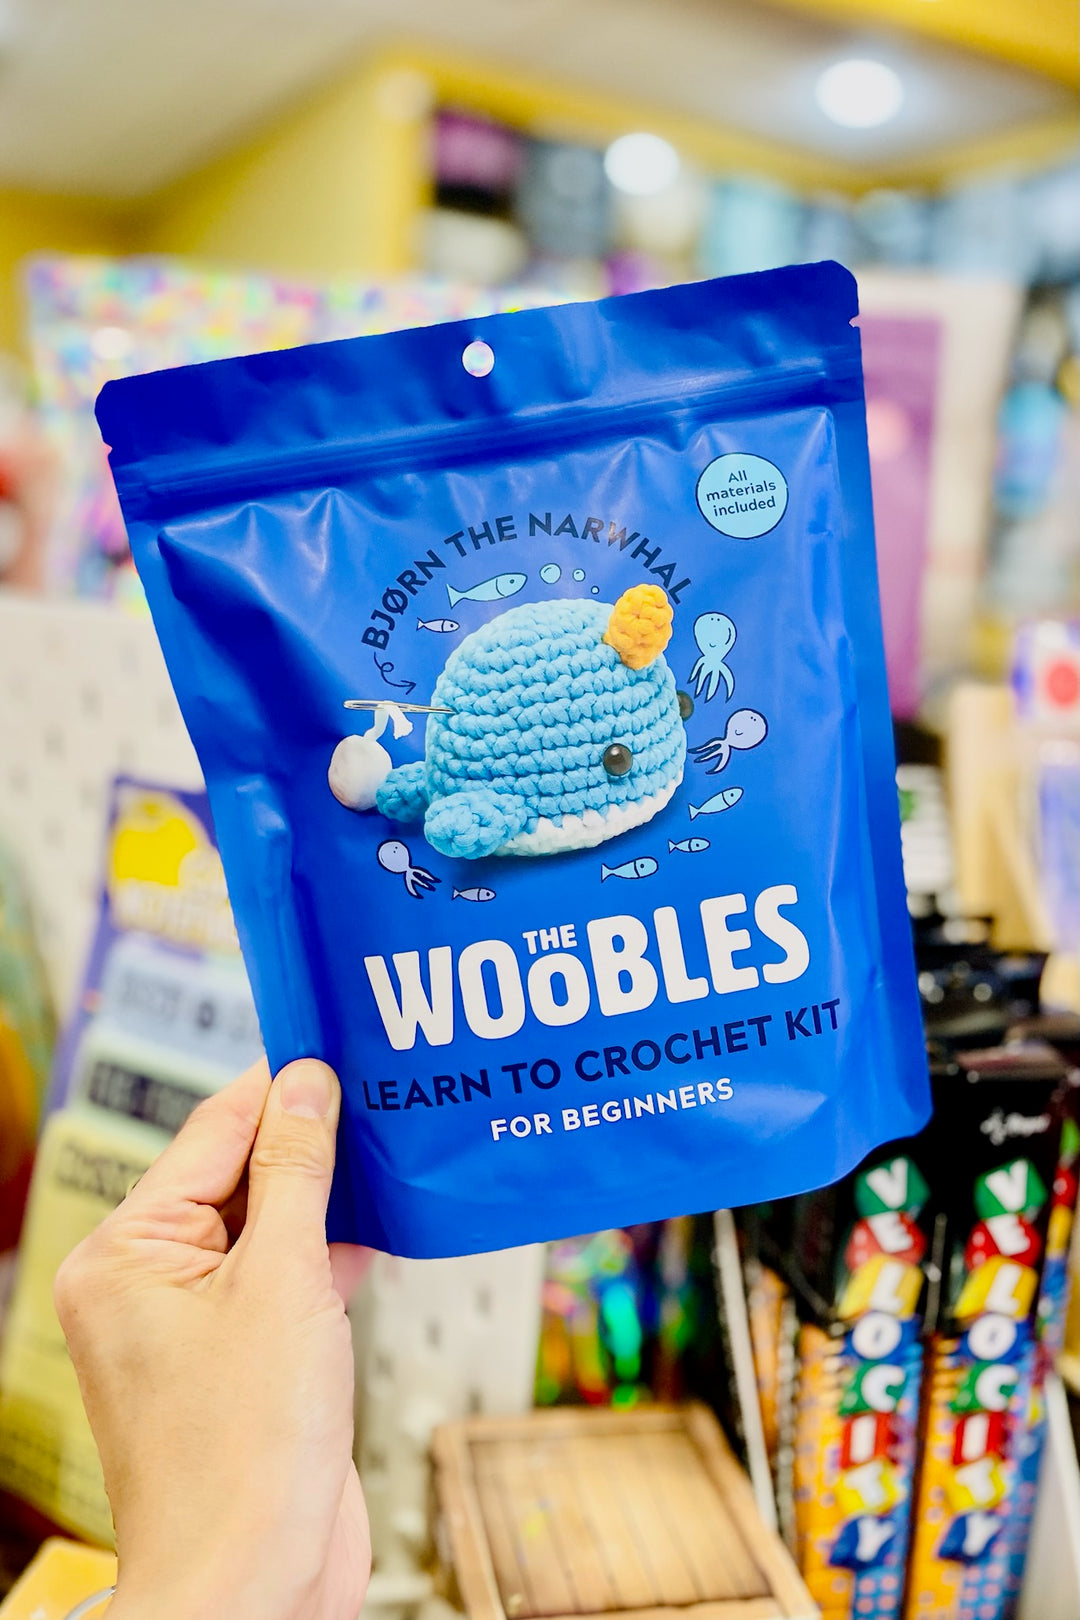 The Woobles, Learn to crochet kits for beginners